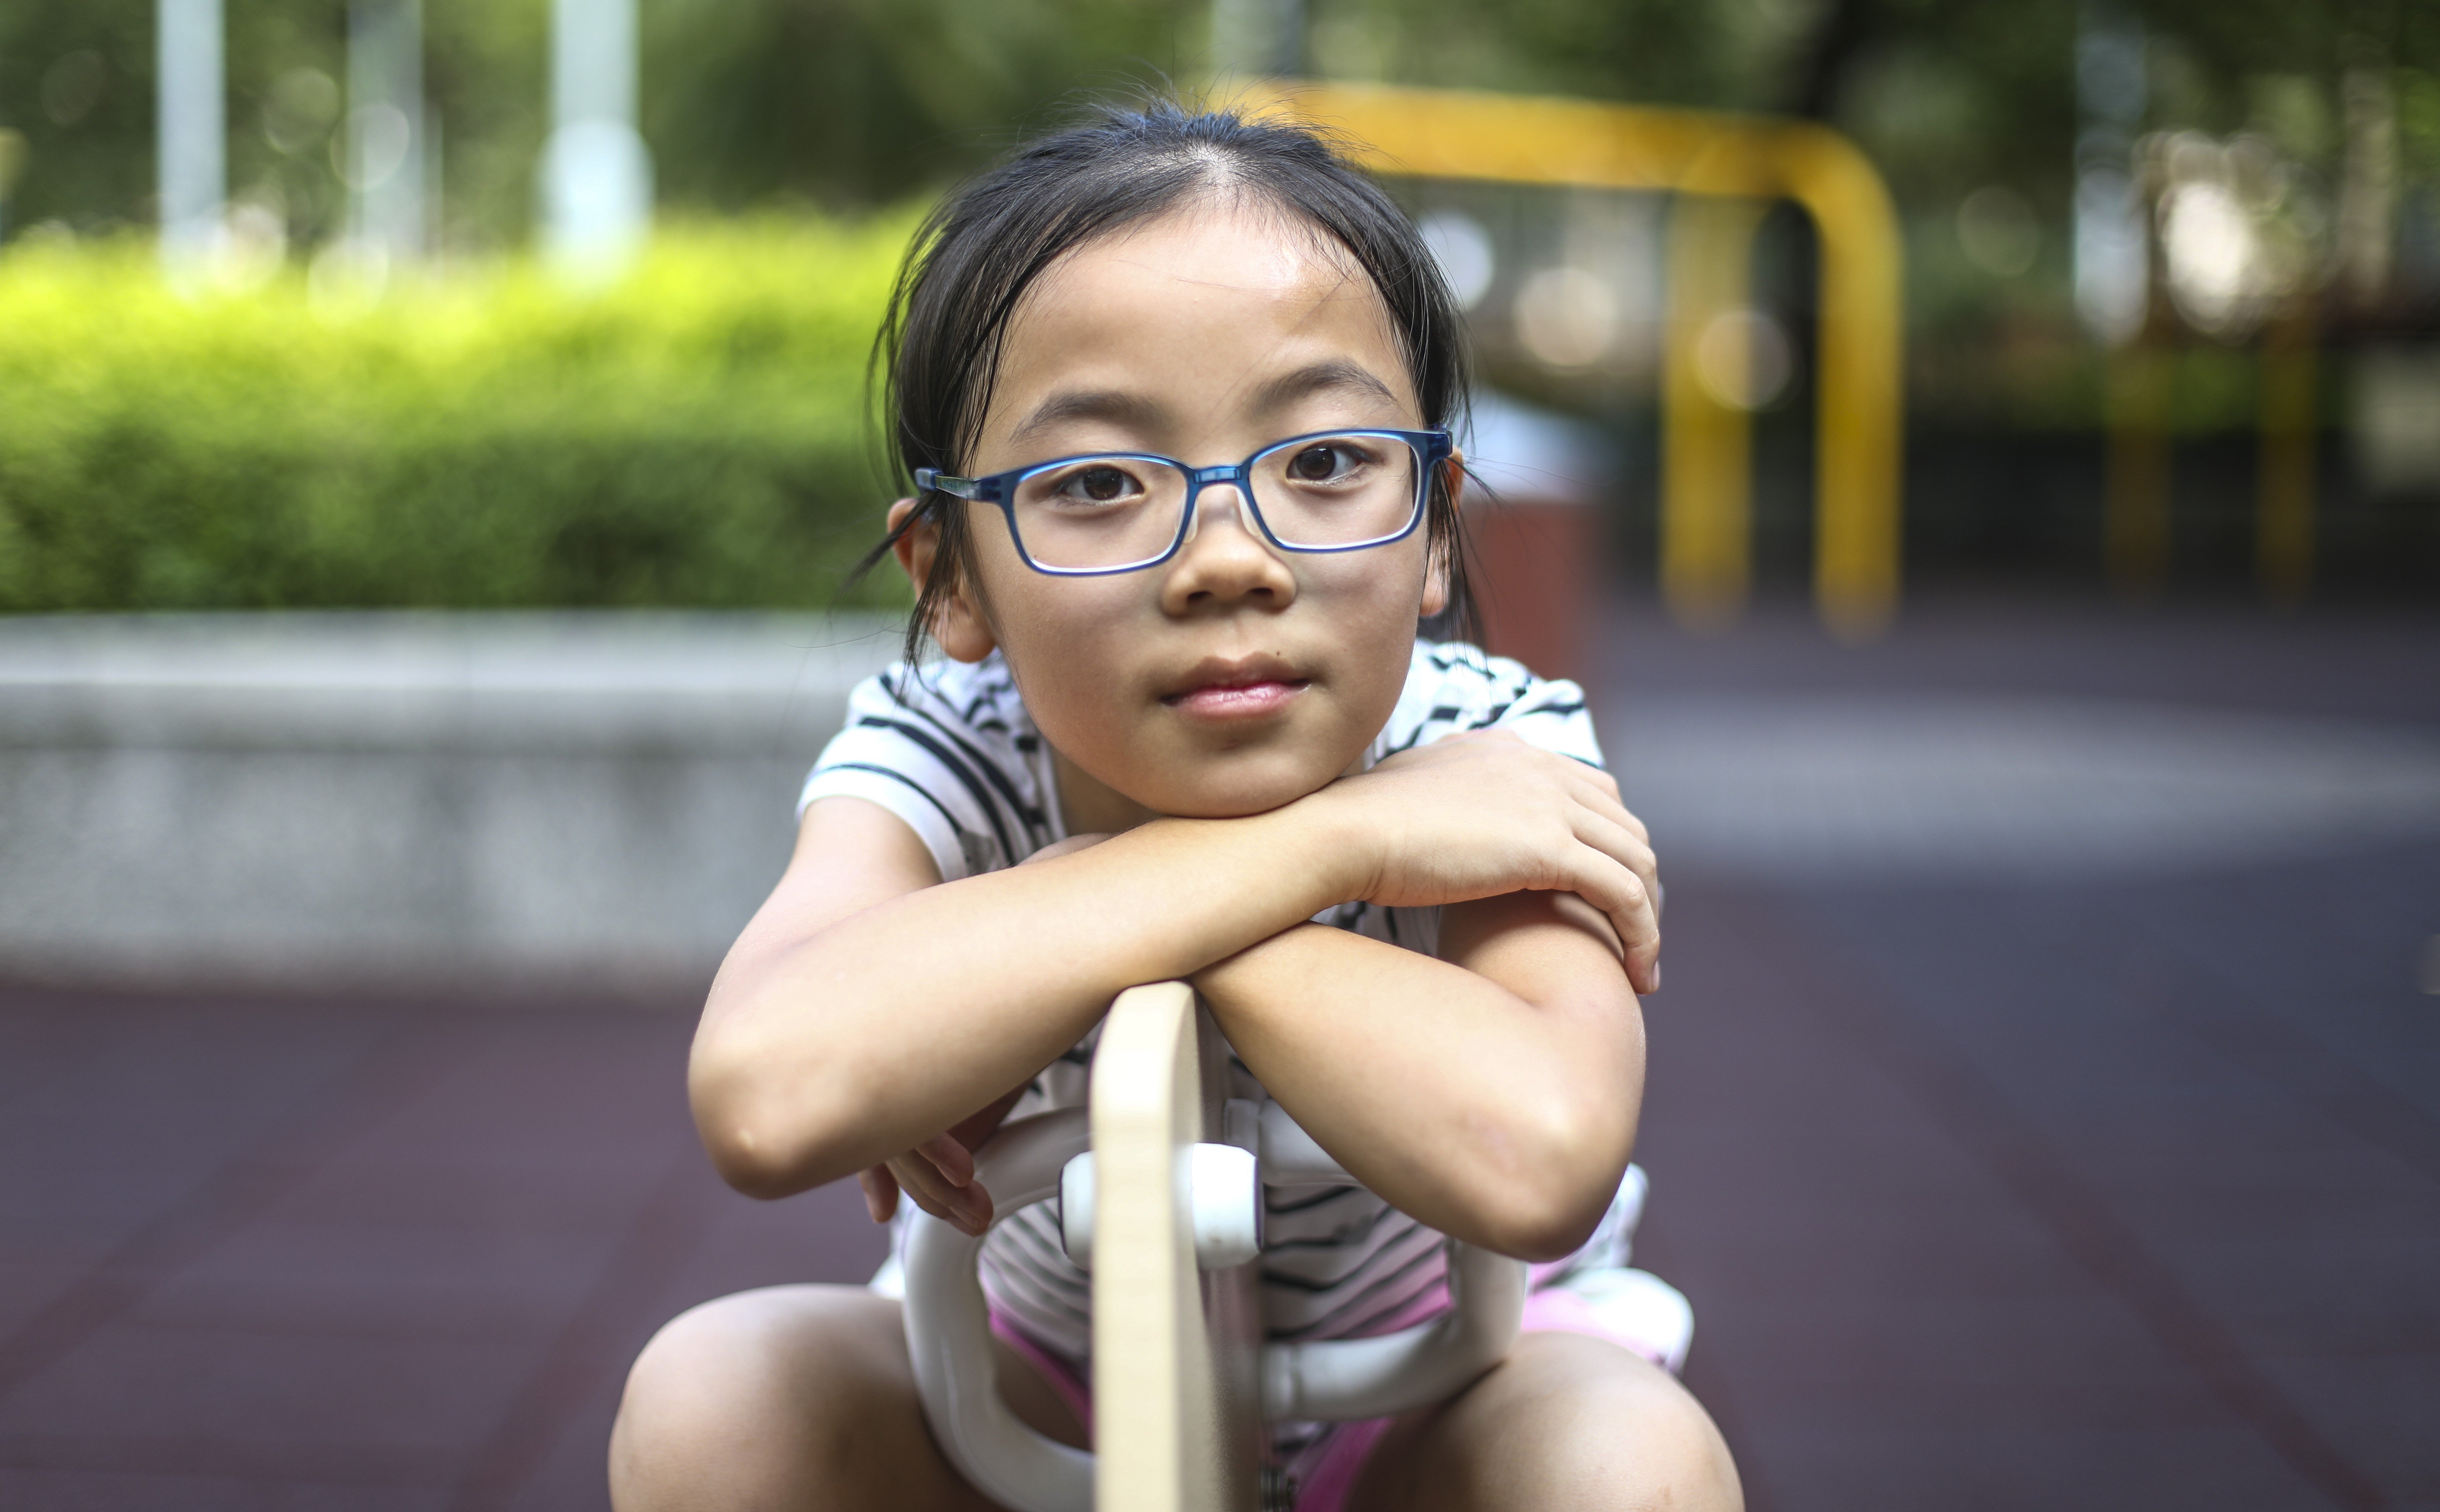 As part of the PolyU-HKIF Children Eye Care Project, Huang Ho-yan will get regular visual screening. Photo: Tory Ho